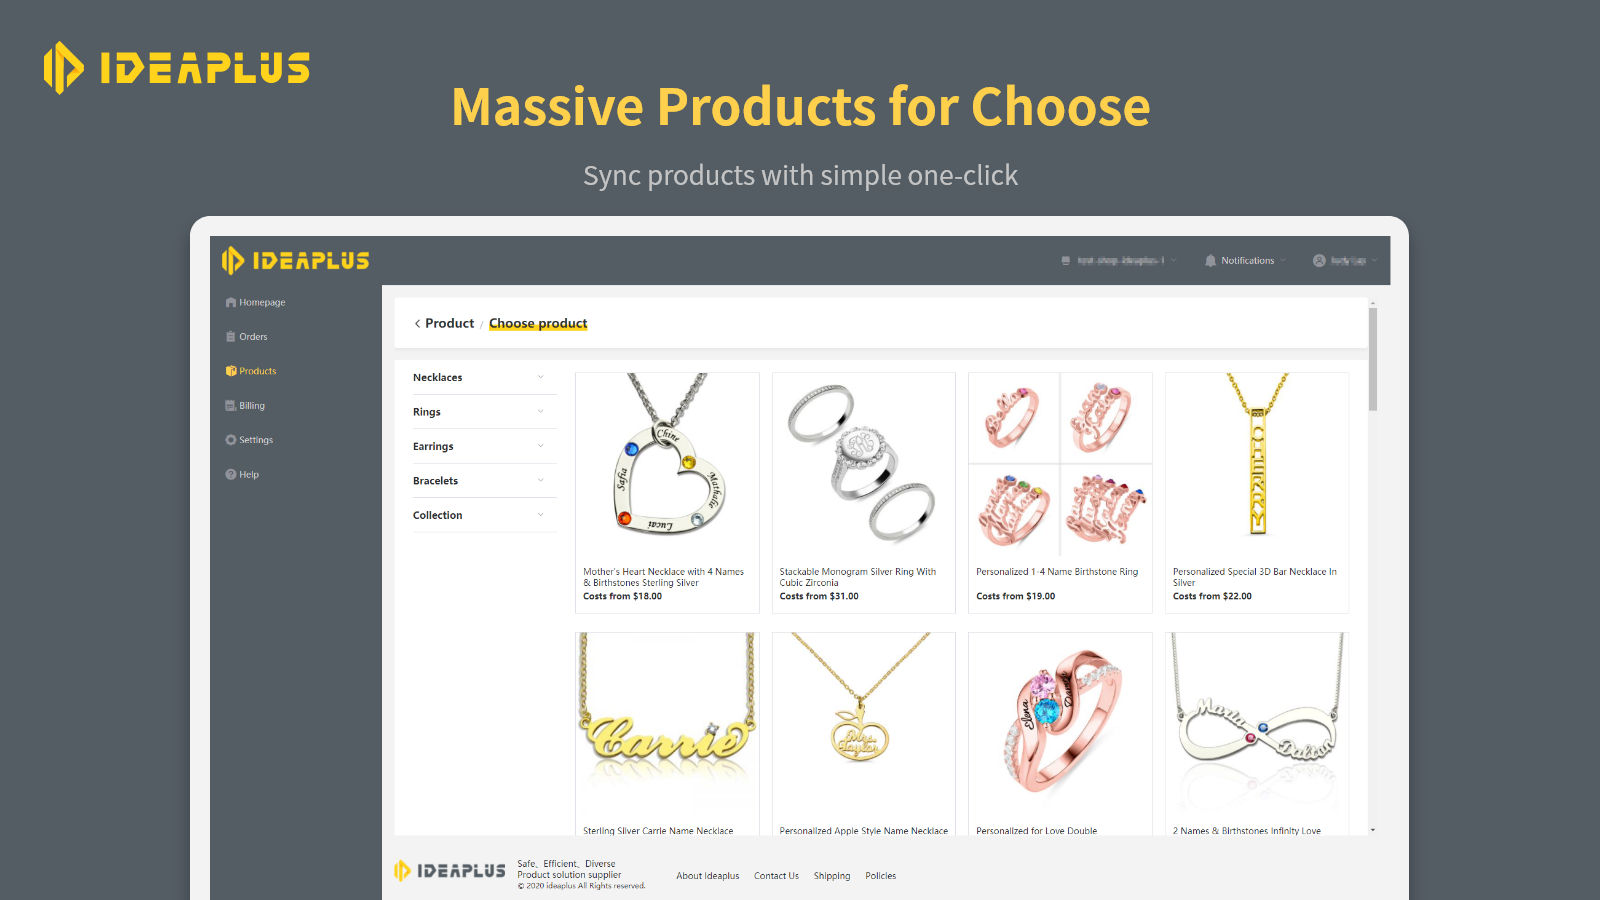 Massive products for choose